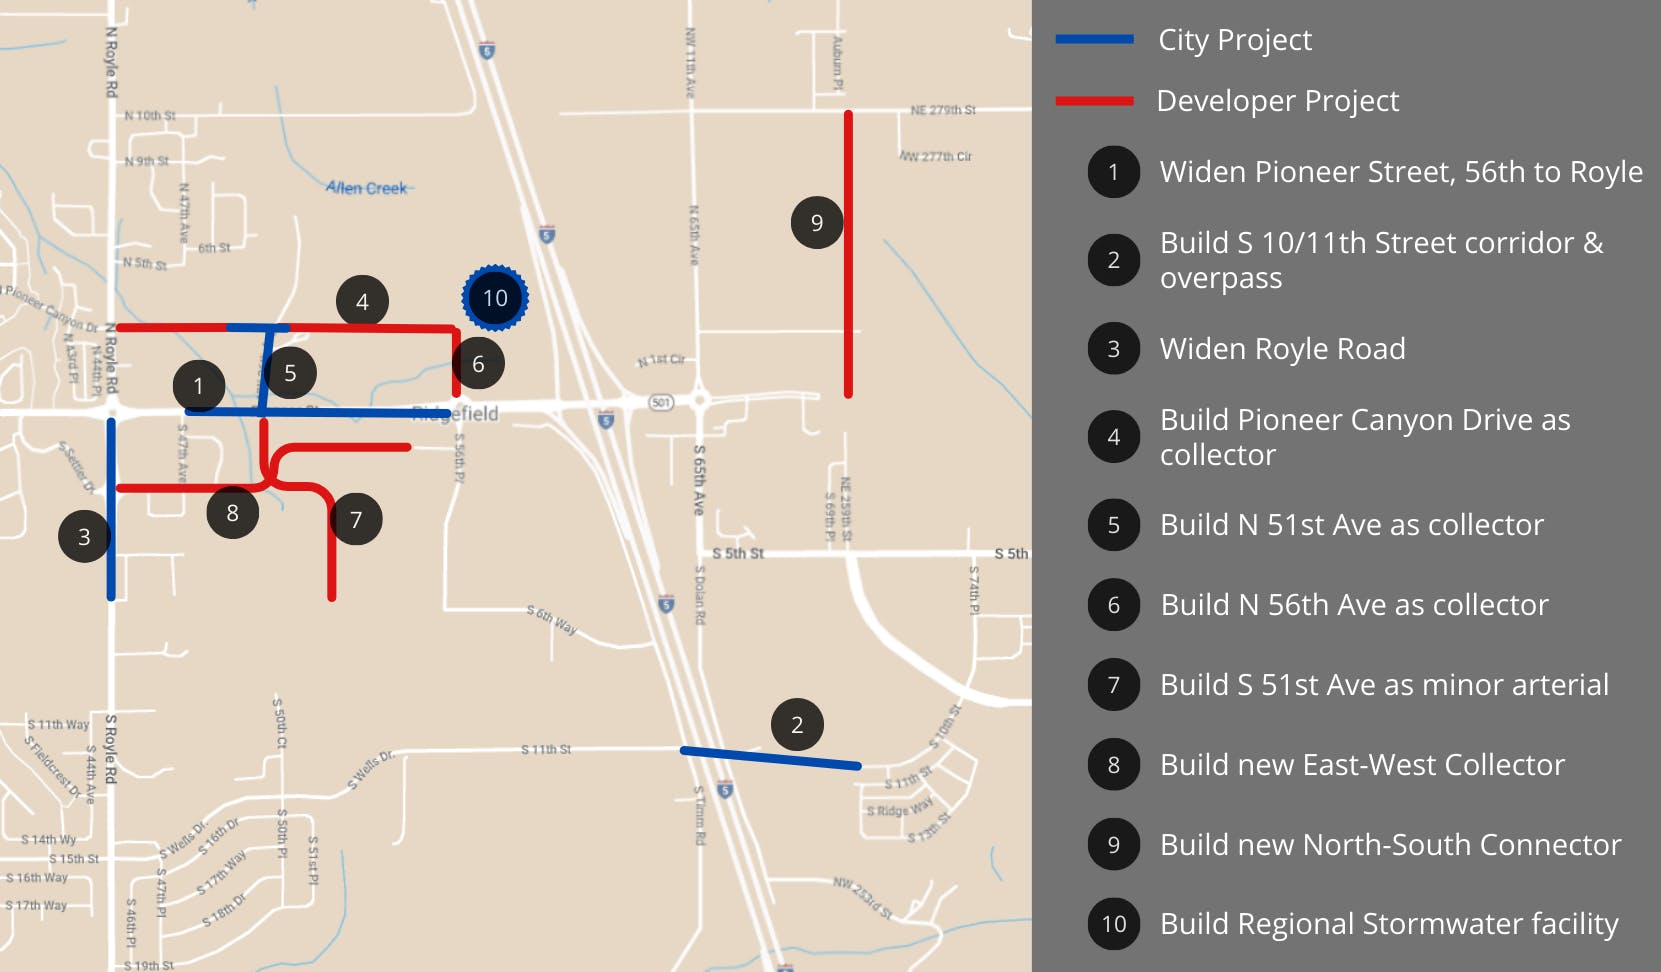 Proposed Project Map coordinated by whether the project is City or Developer led.